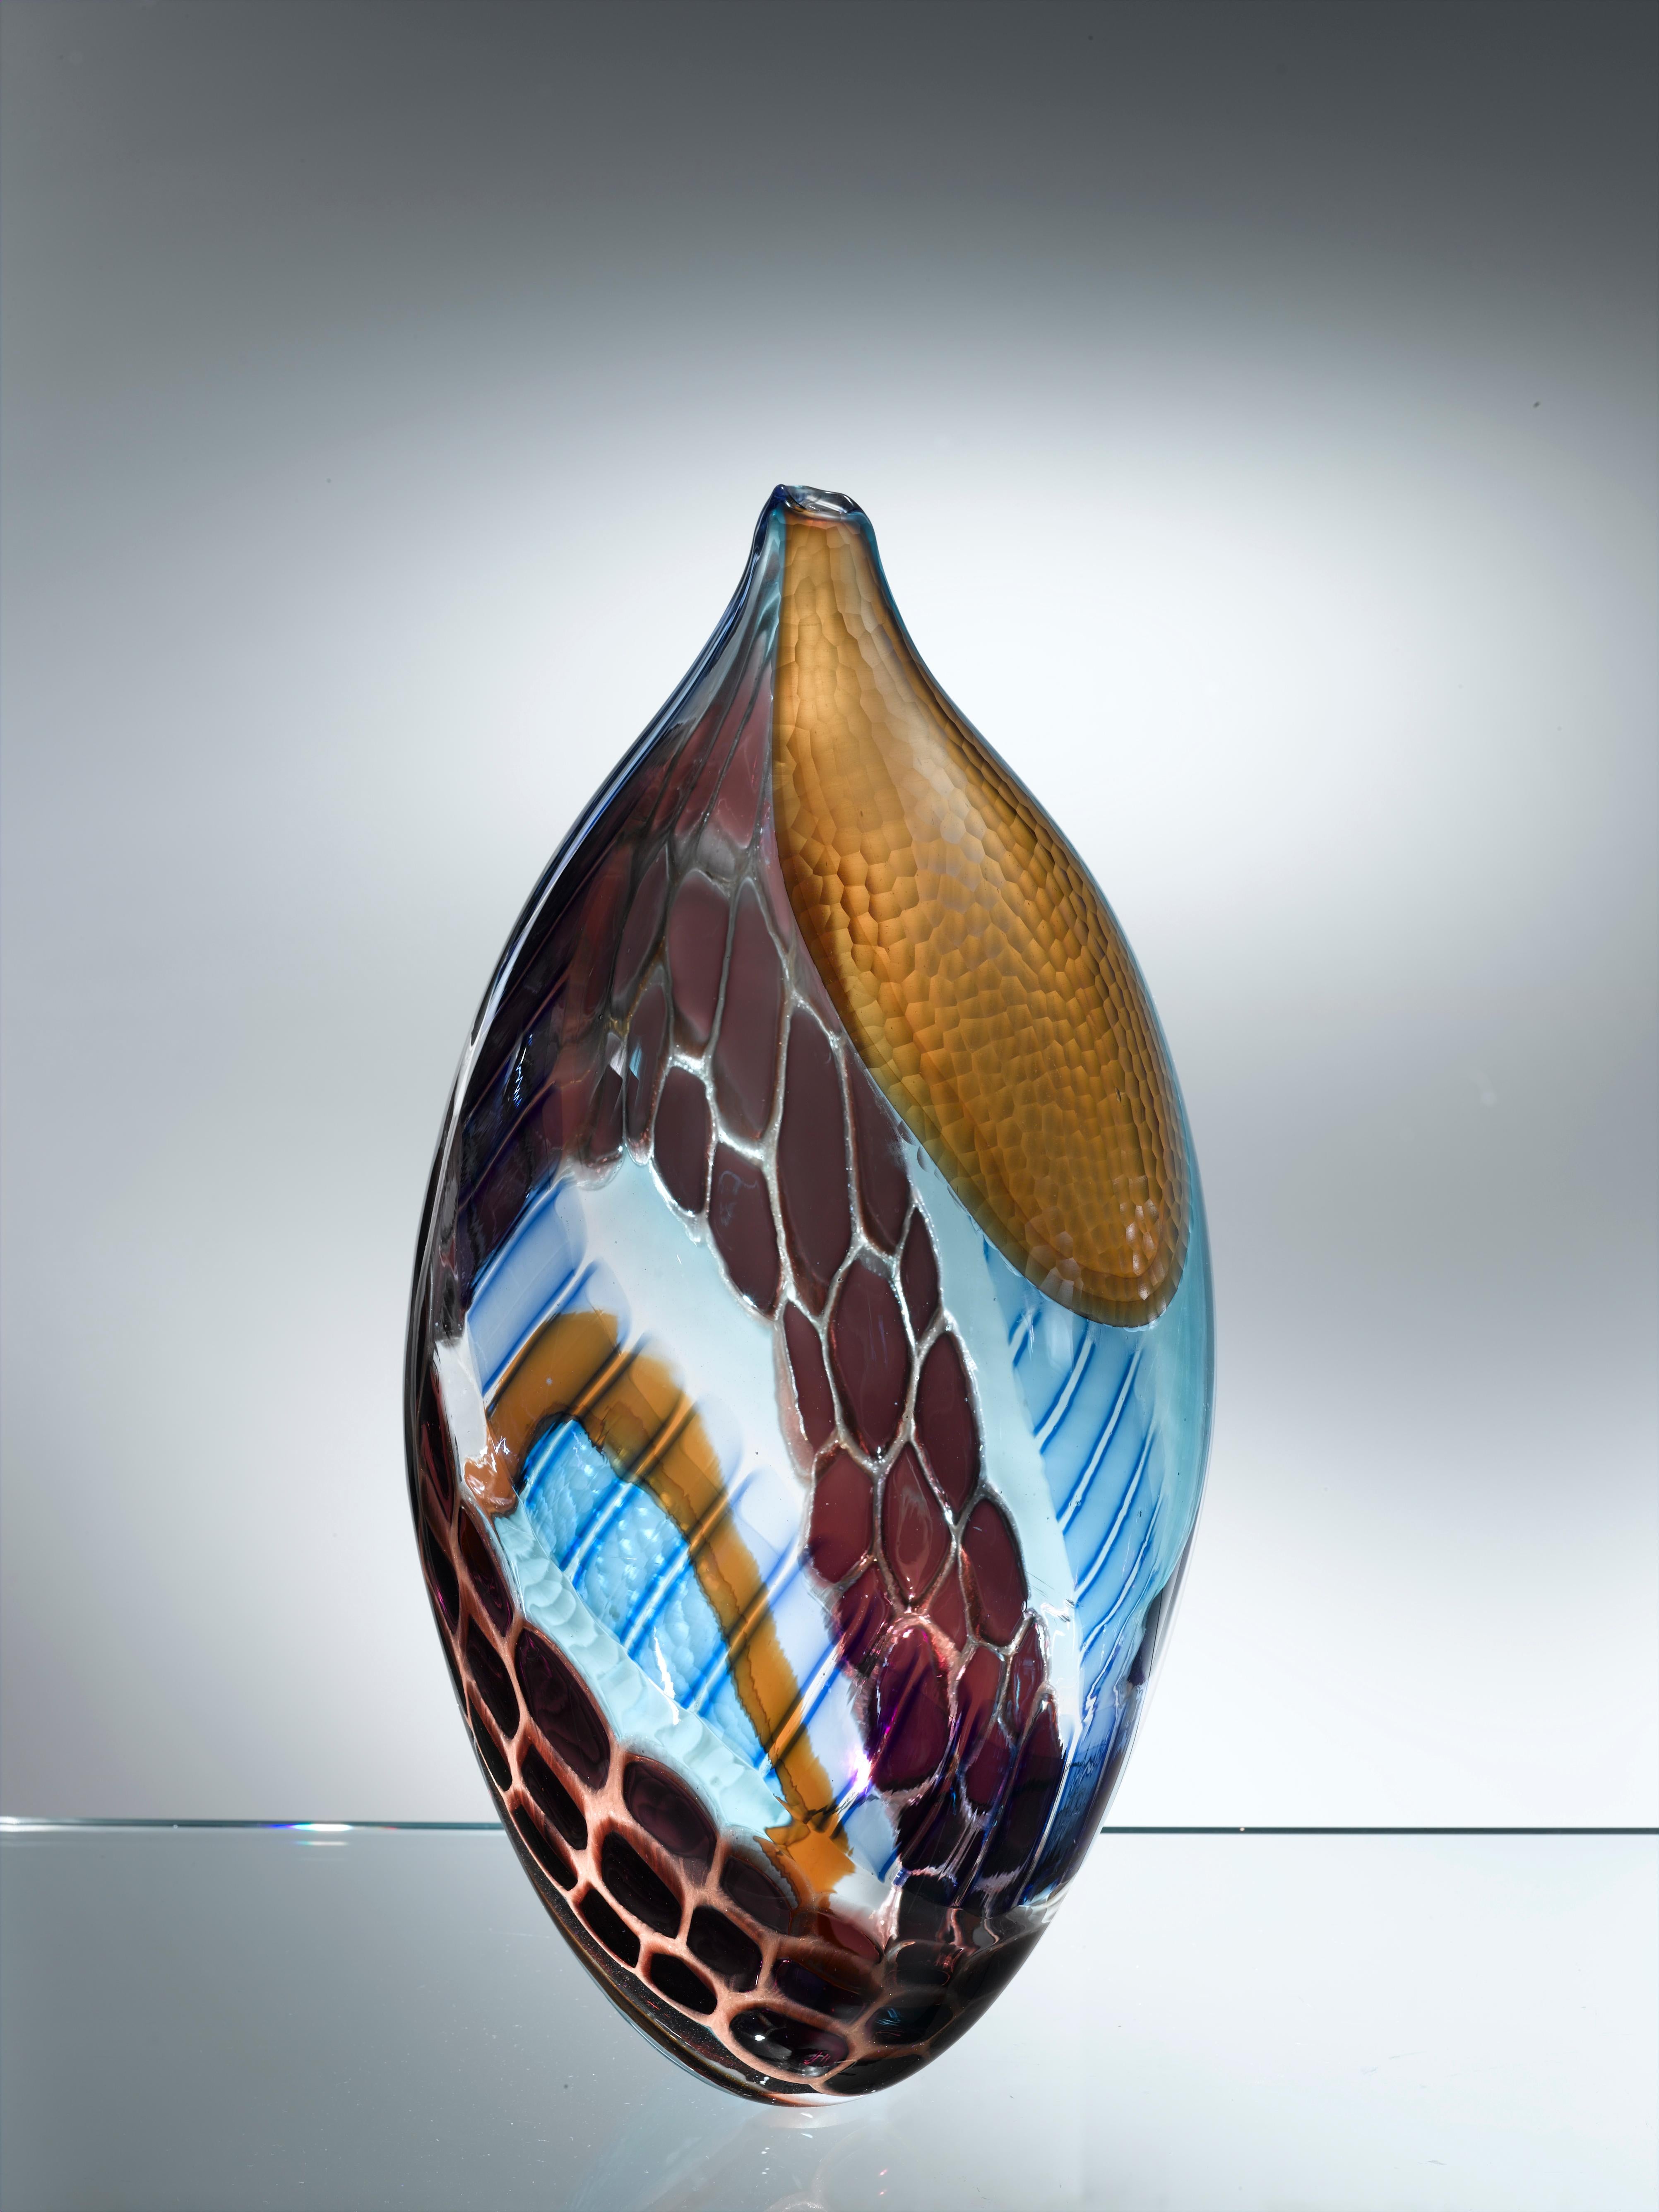 Murano artistic glass. The Murano artistic glass sculpture is a creative and natural expression of the artist Eros Raffael, made of Murano blown glass by Eros Raffael, in this sculpture they are enclosed in perfect regular shapes: the harmony, and